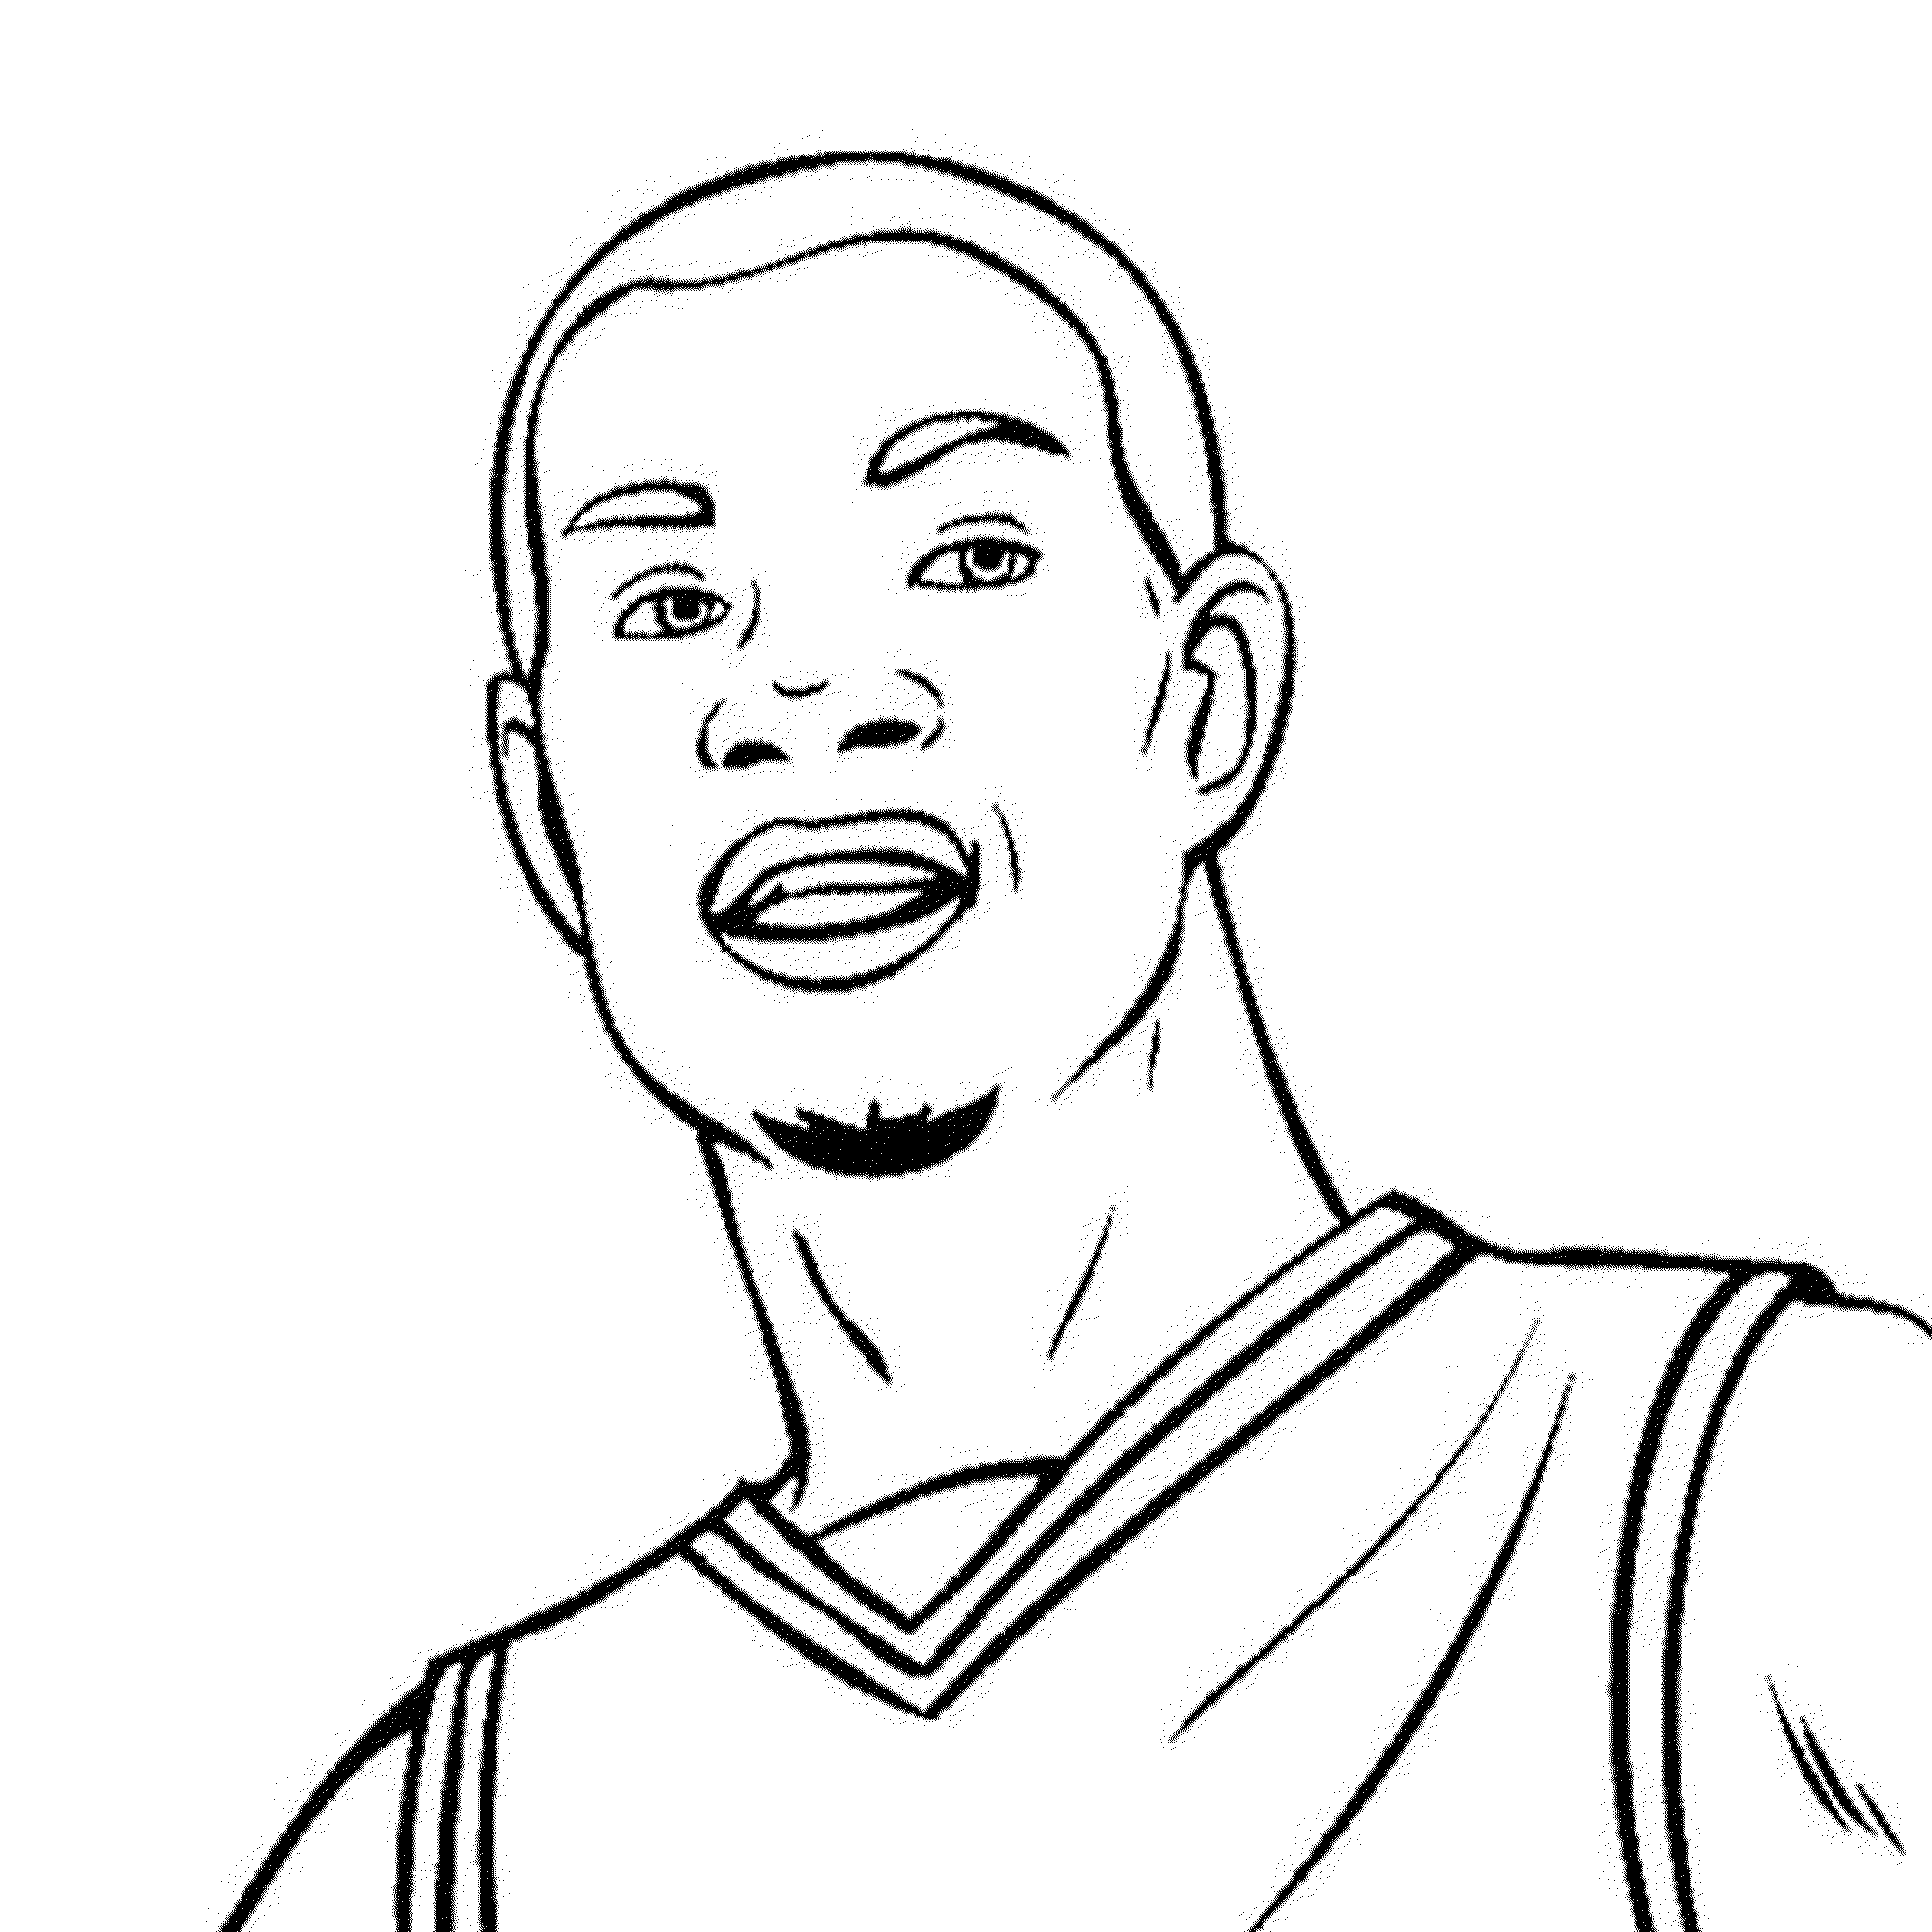 Download basketball-player-coloring-pages | | BestAppsForKids.com